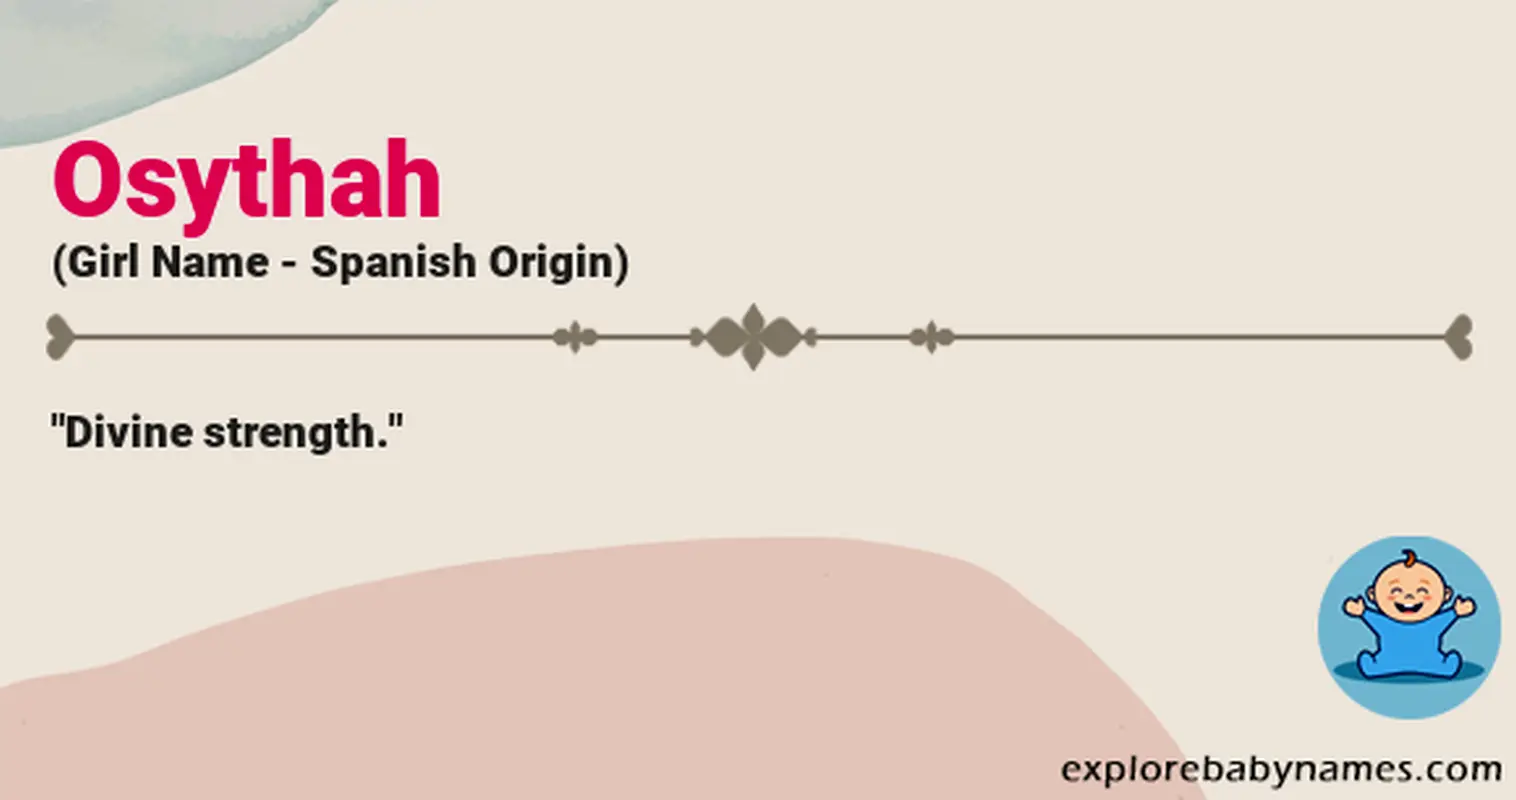 Meaning of Osythah